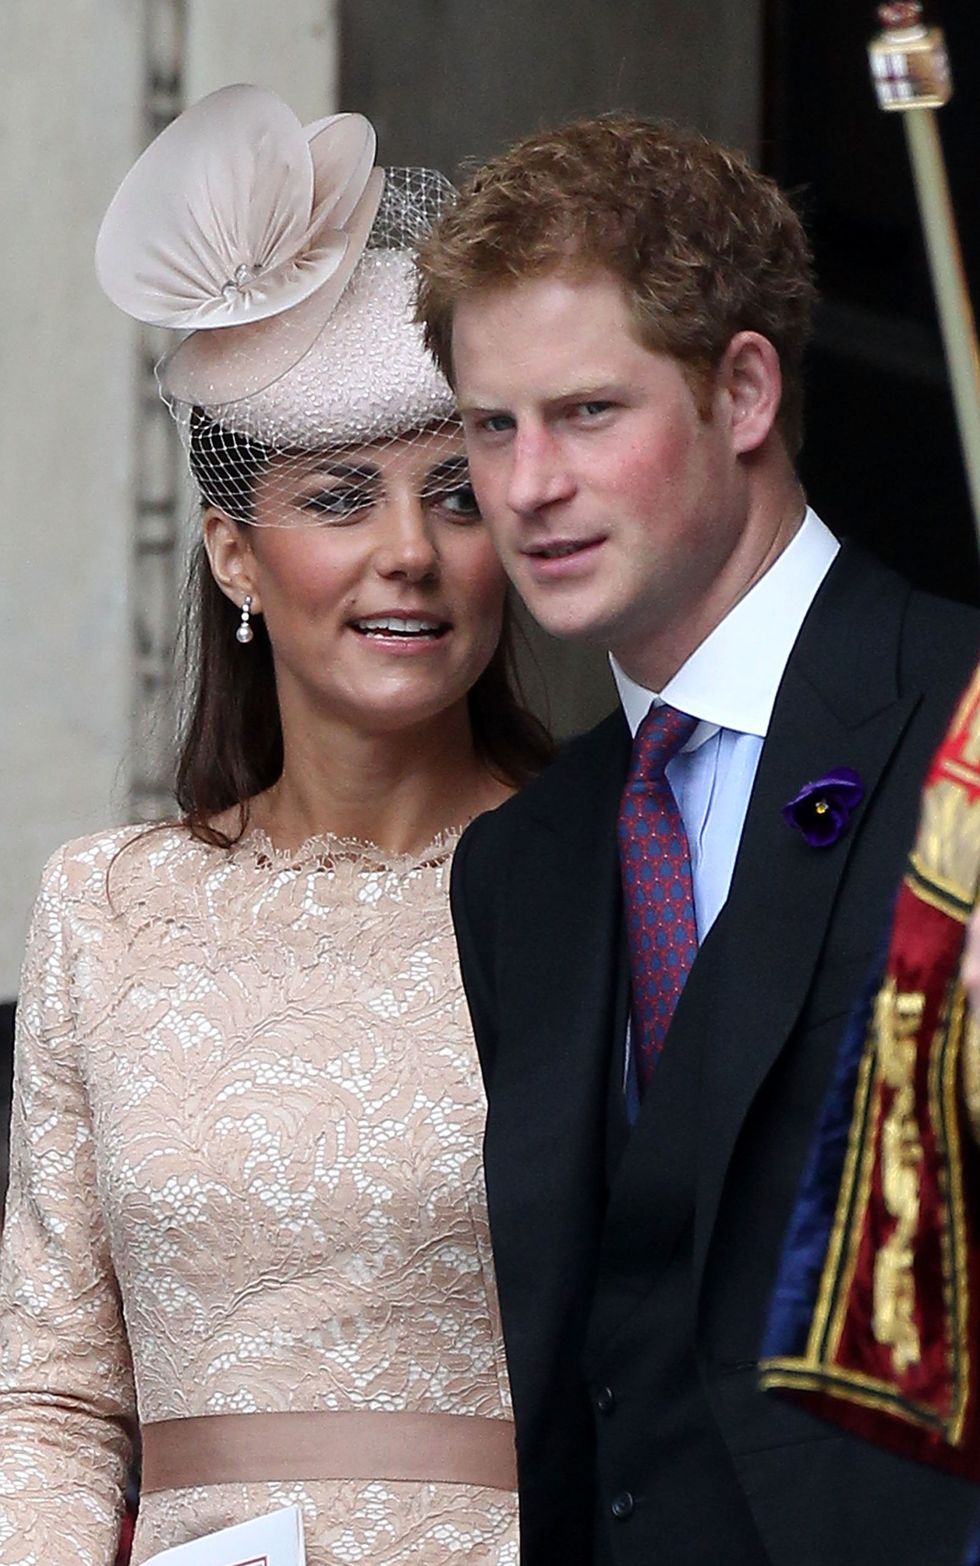 LONDON, ENGLAND - JUNE 05: Catherine, Duchess of Cambridge and Prince Harry depart the Service of Thanksgiving at St Paul's Cathedral as part of the Diamond Jubilee, marking the 60th anniversary of the accession of Queen Elizabeth II on June 5, 2012 in London, England.  (Photo by Danny Martindale/WireImage)